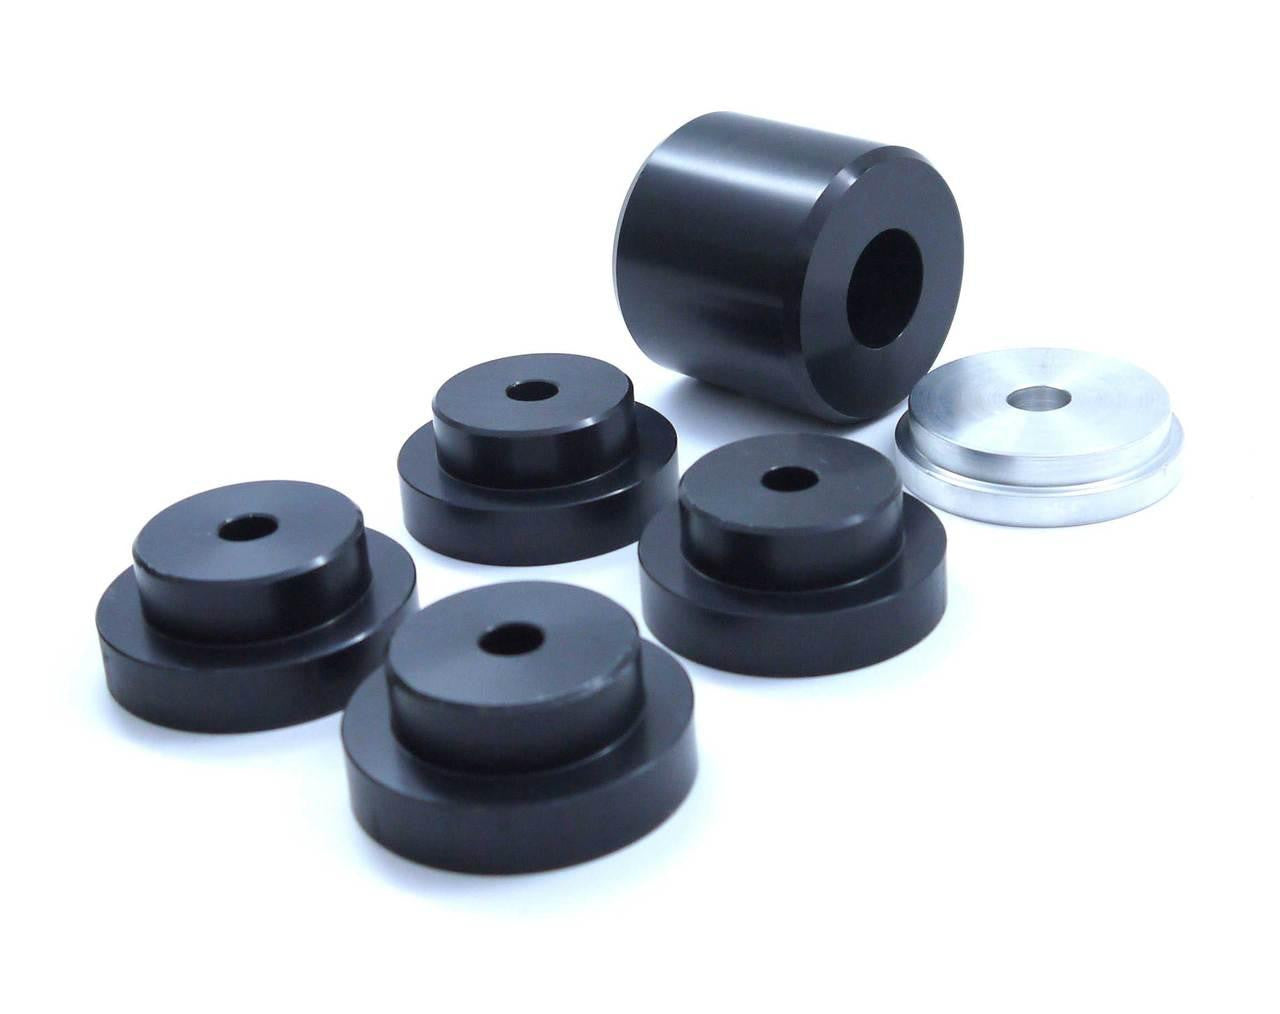 SPL- 350Z/G35 Solid Differential Mount Bushings